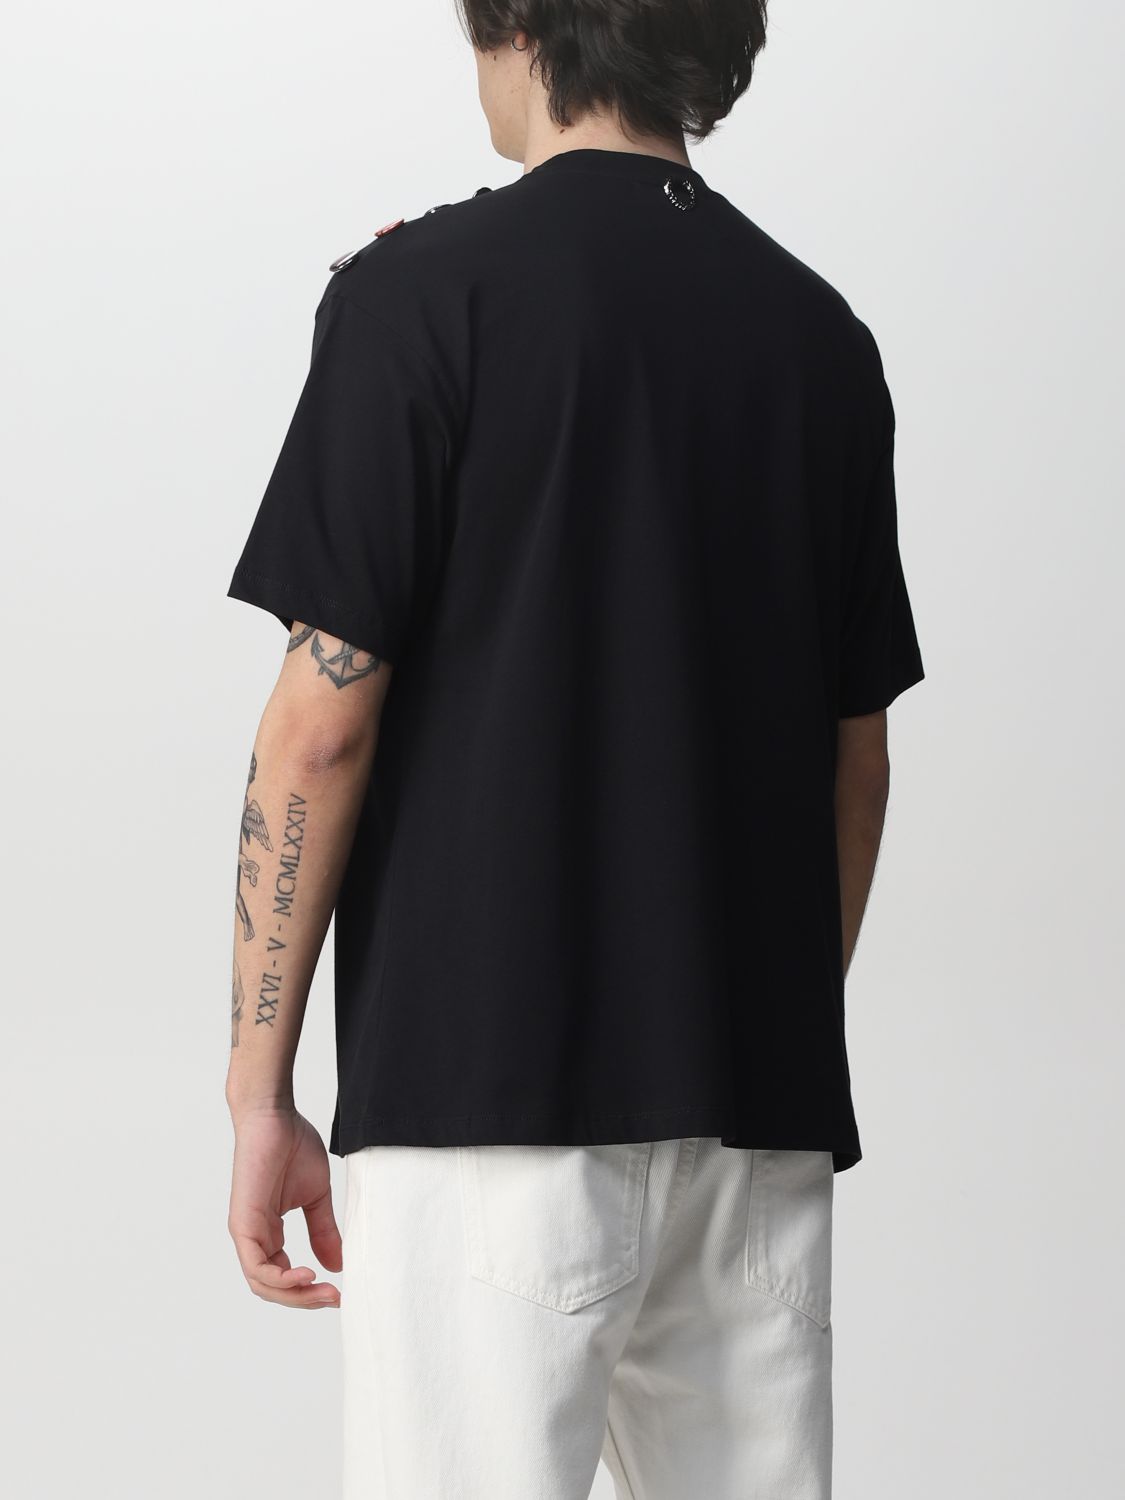 T-shirt Fred Perry By Raf Simons: T-shirt Fred Perry By Raf Simons homme noir 2